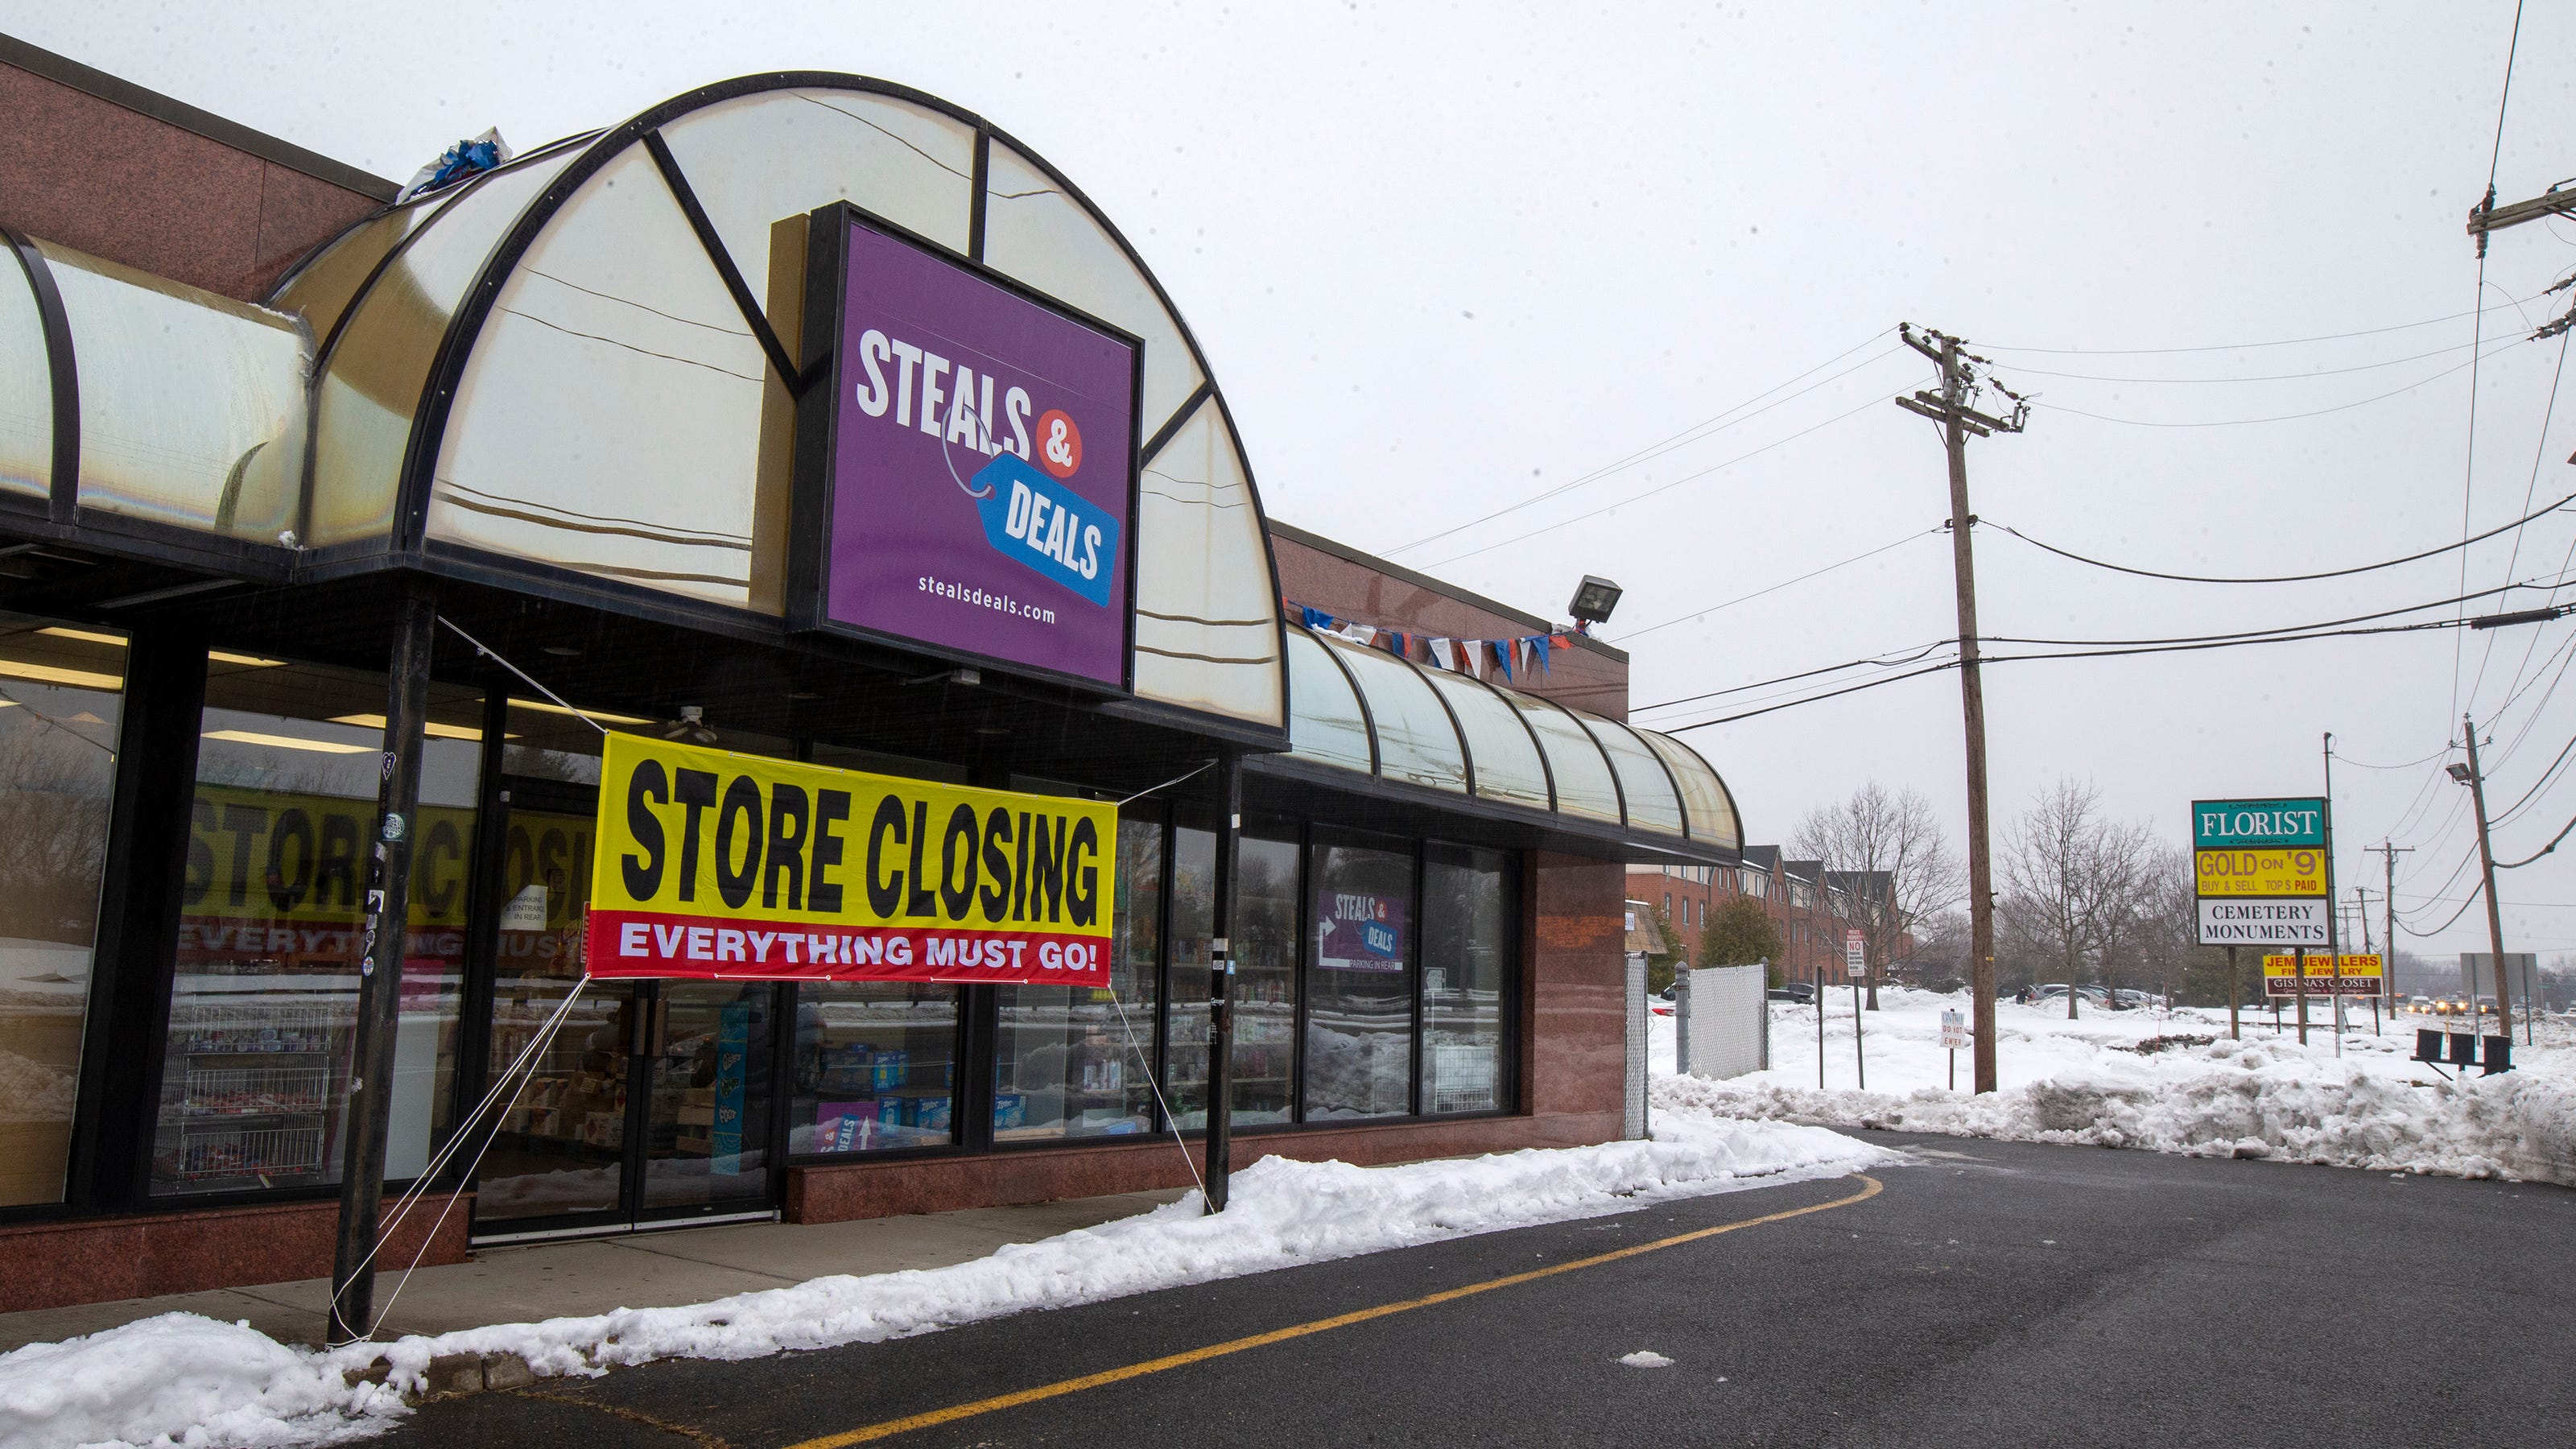 steals-deals-takes-over-former-toms-river-bed-bath-beyond-store